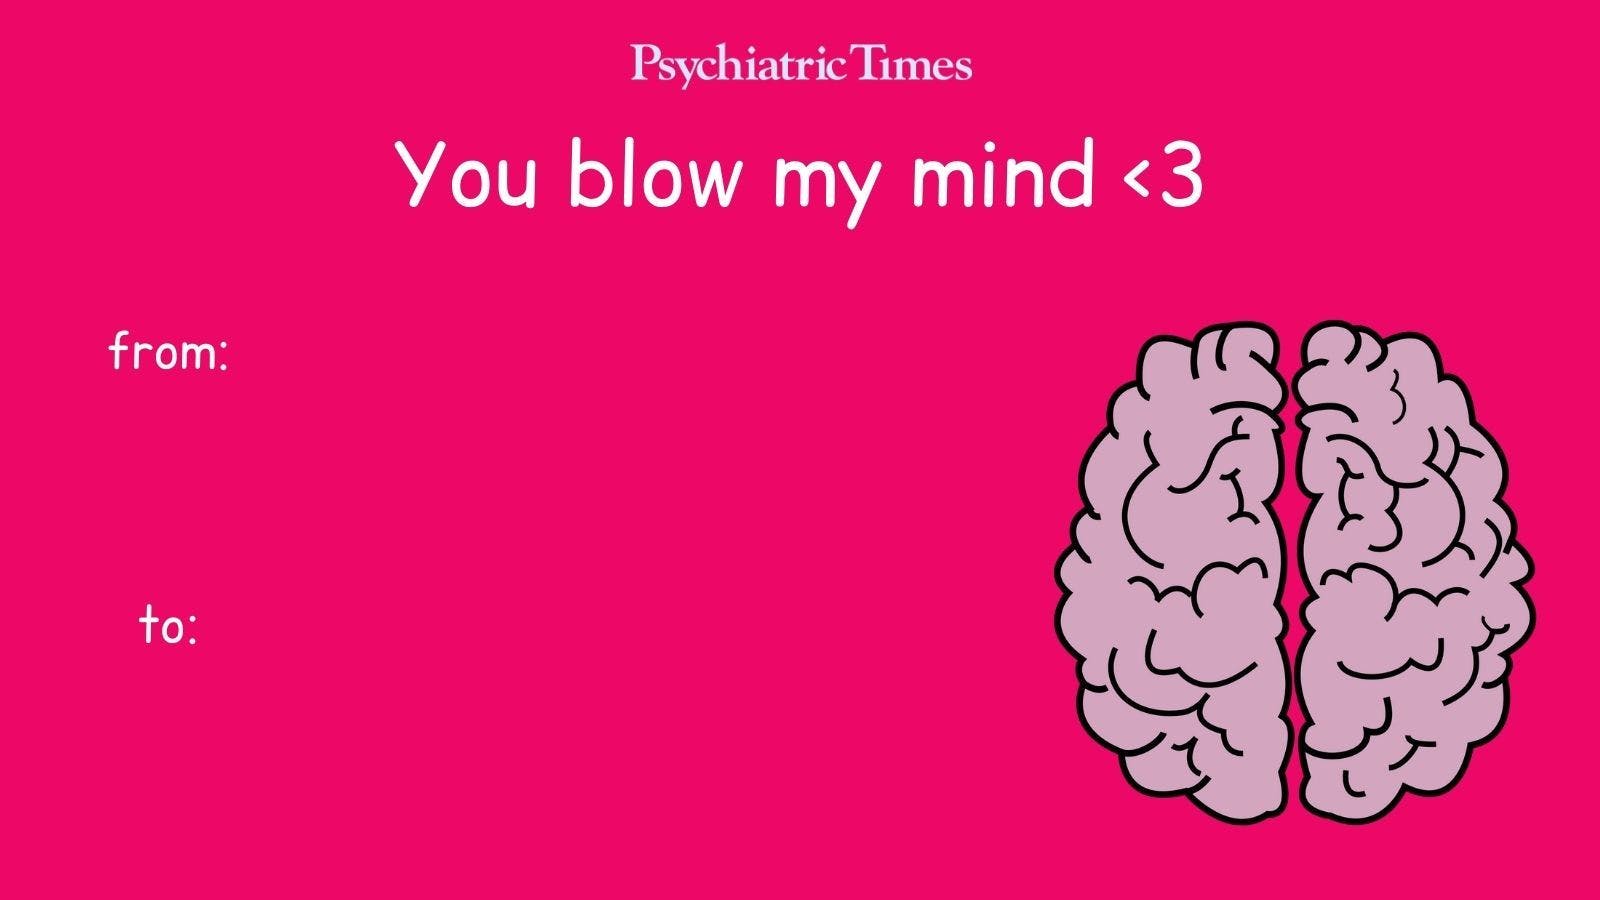 You blow my mind <3